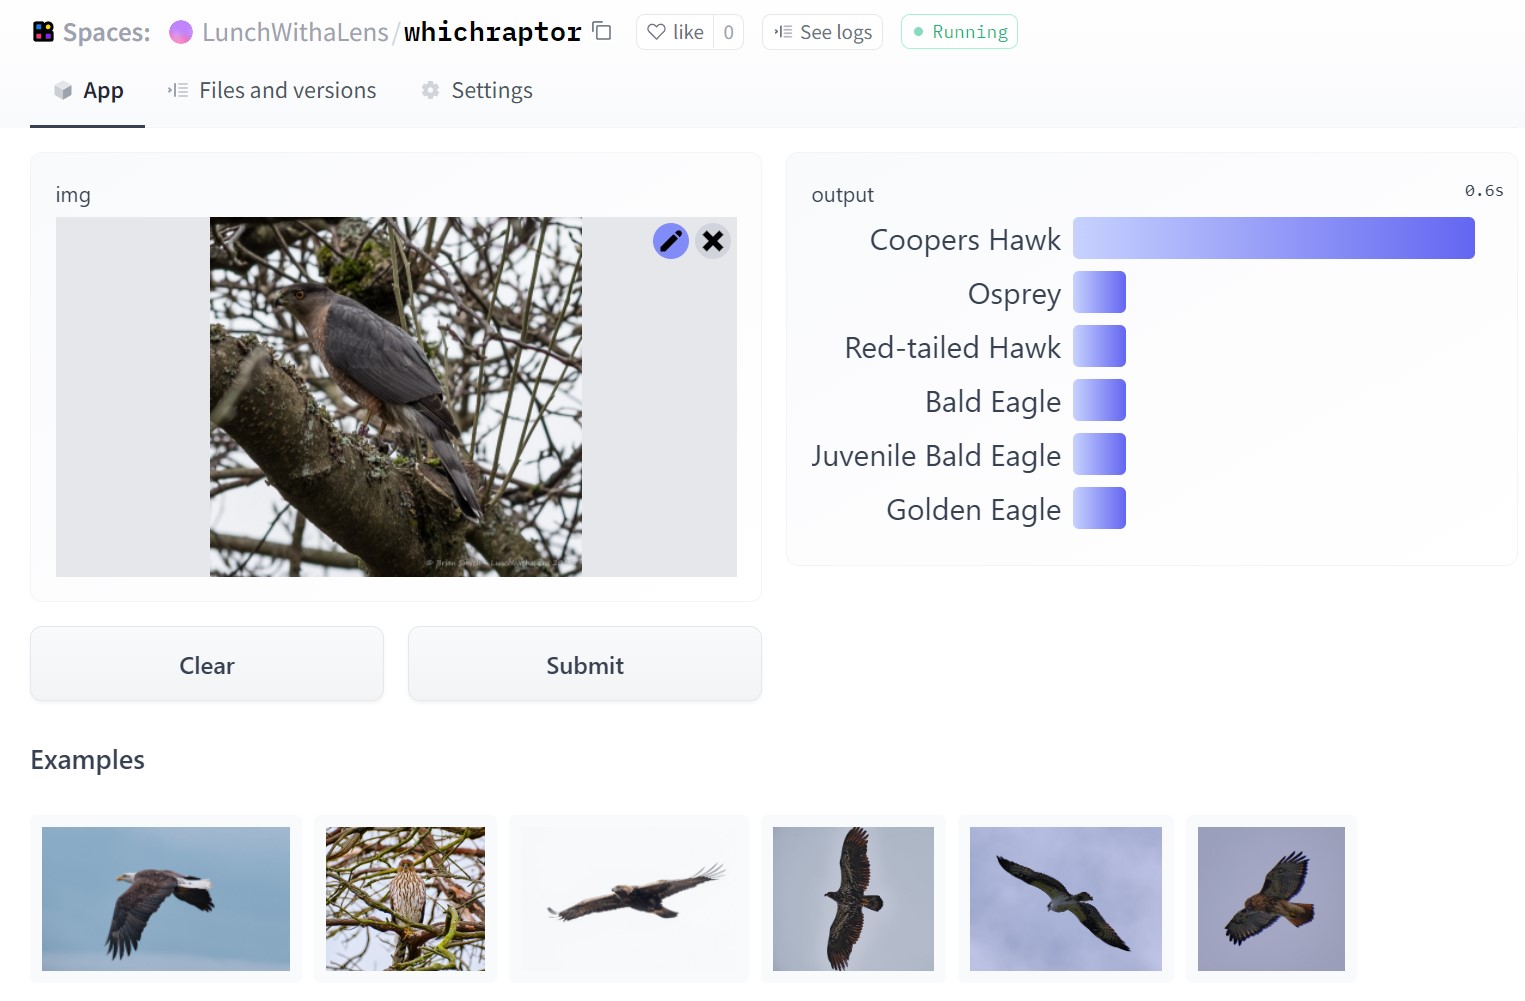 The application showing the samples and an identified Cooper's Hawk in my garden